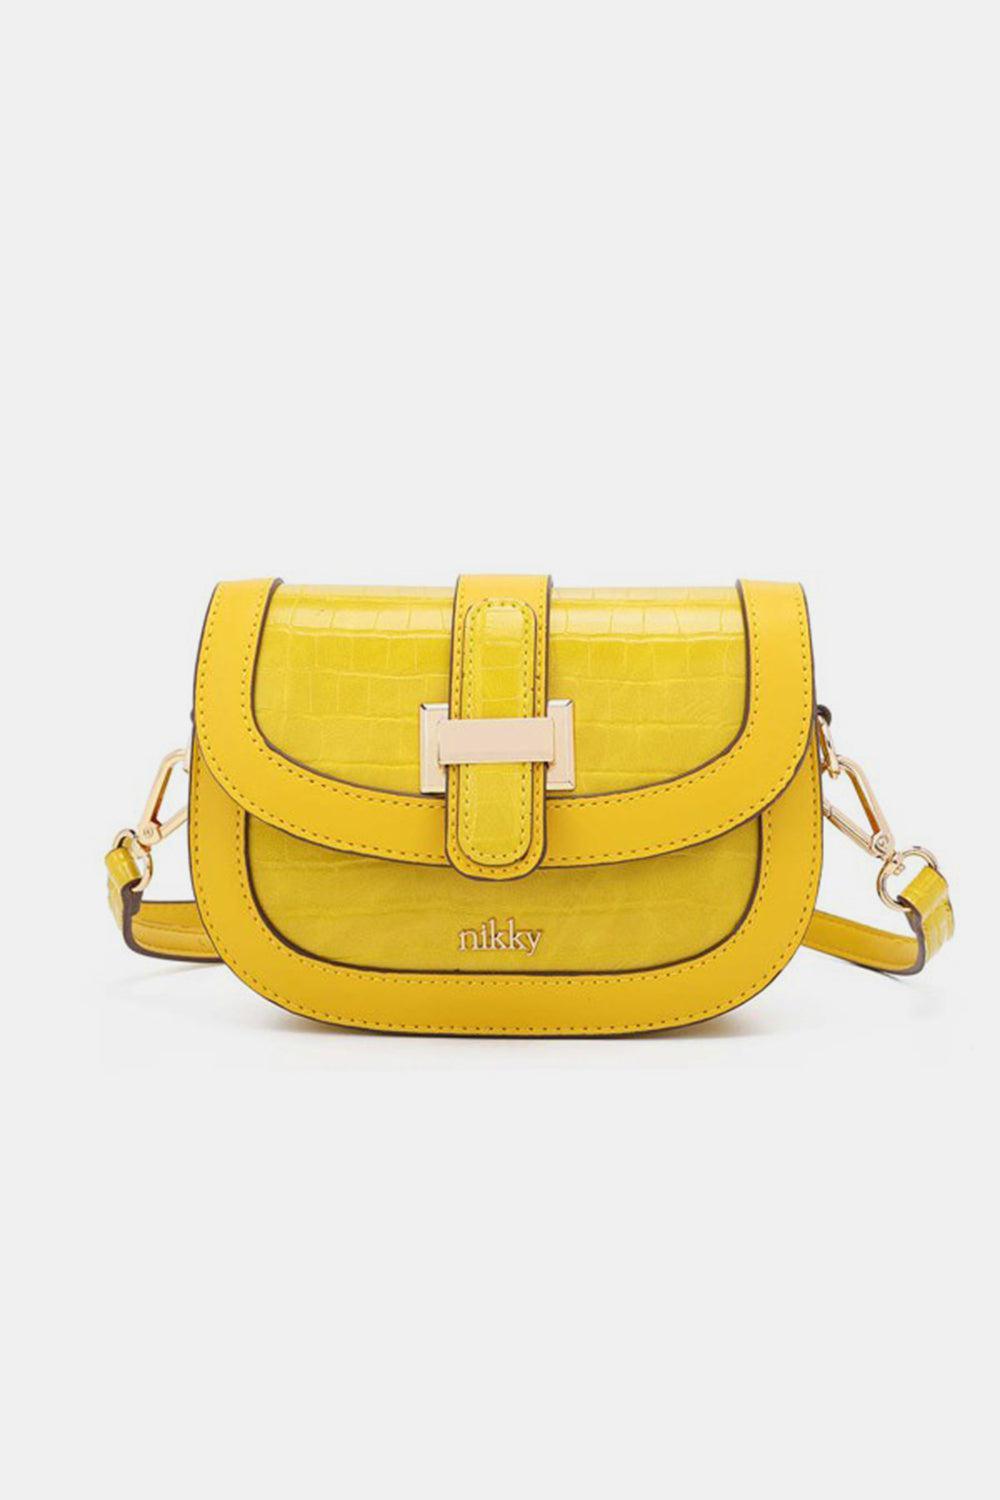 a yellow cross body bag on a white background